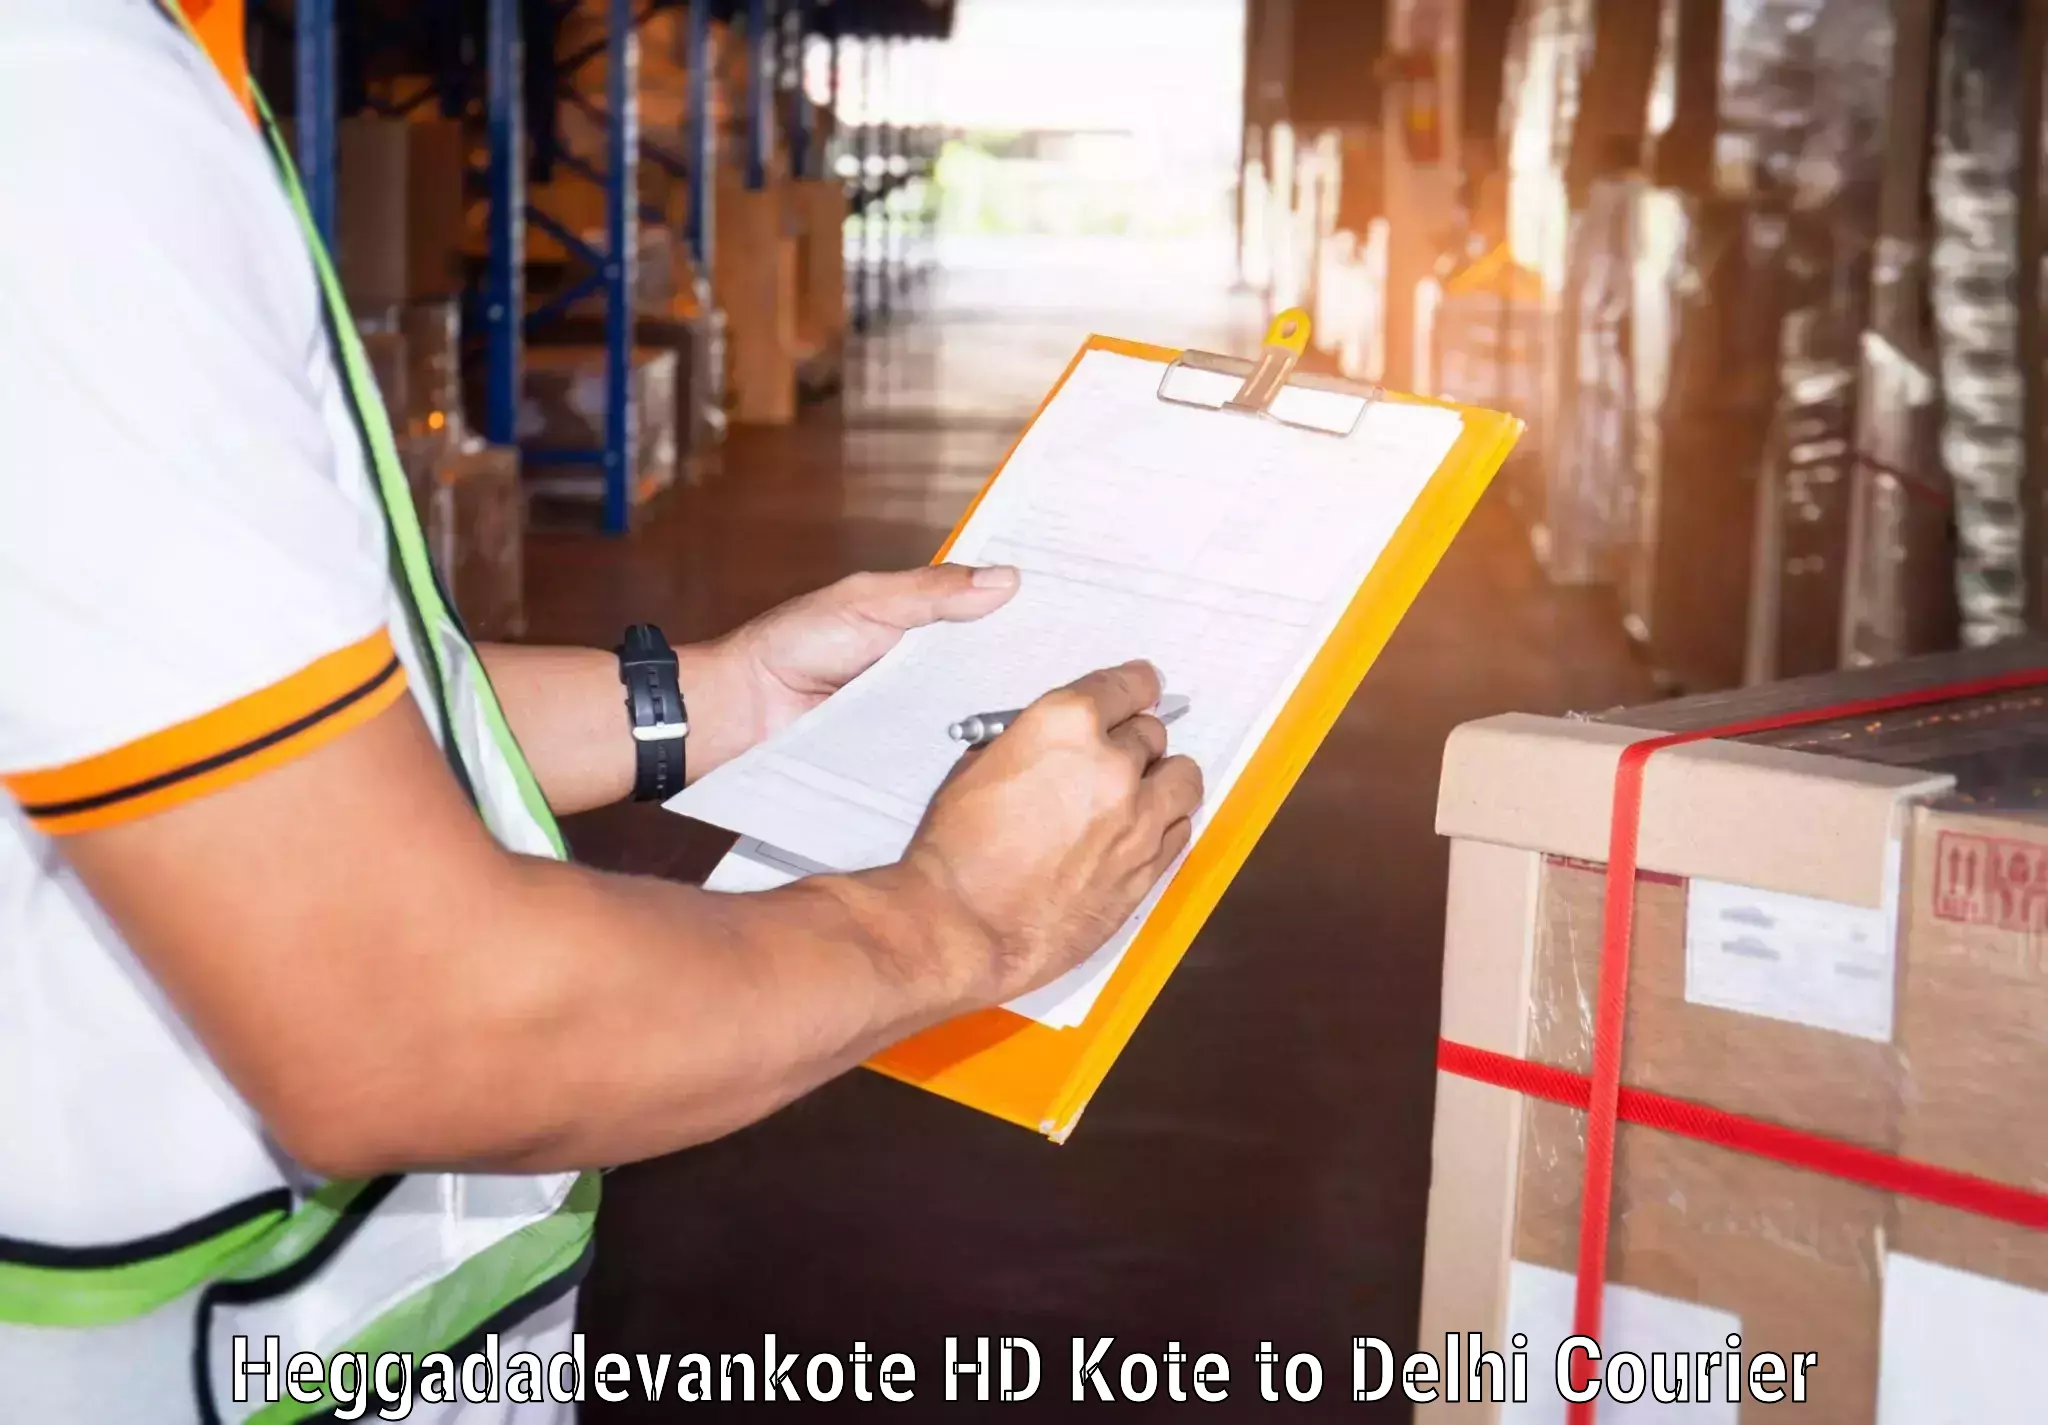 Business courier solutions Heggadadevankote HD Kote to NCR